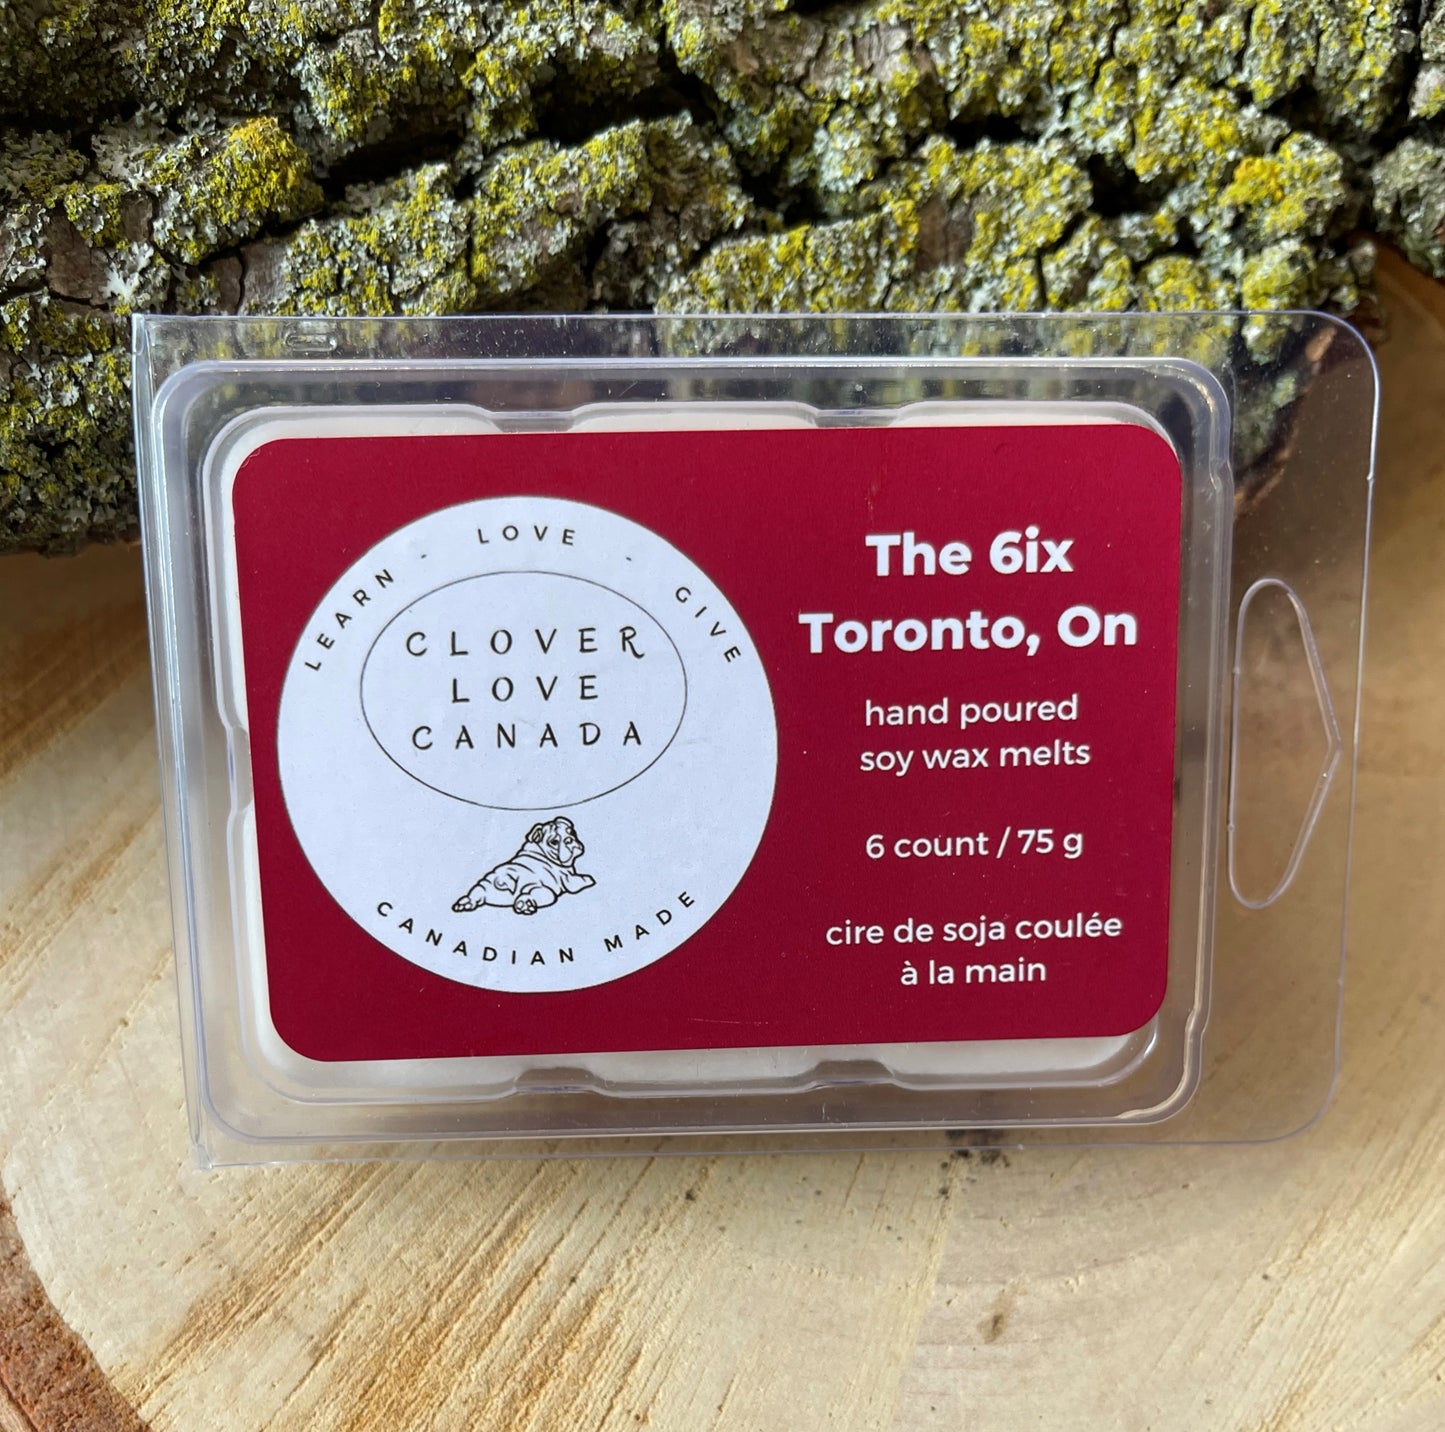 Hand poured soy wax melts in fragrance the Six Toronto Ontario